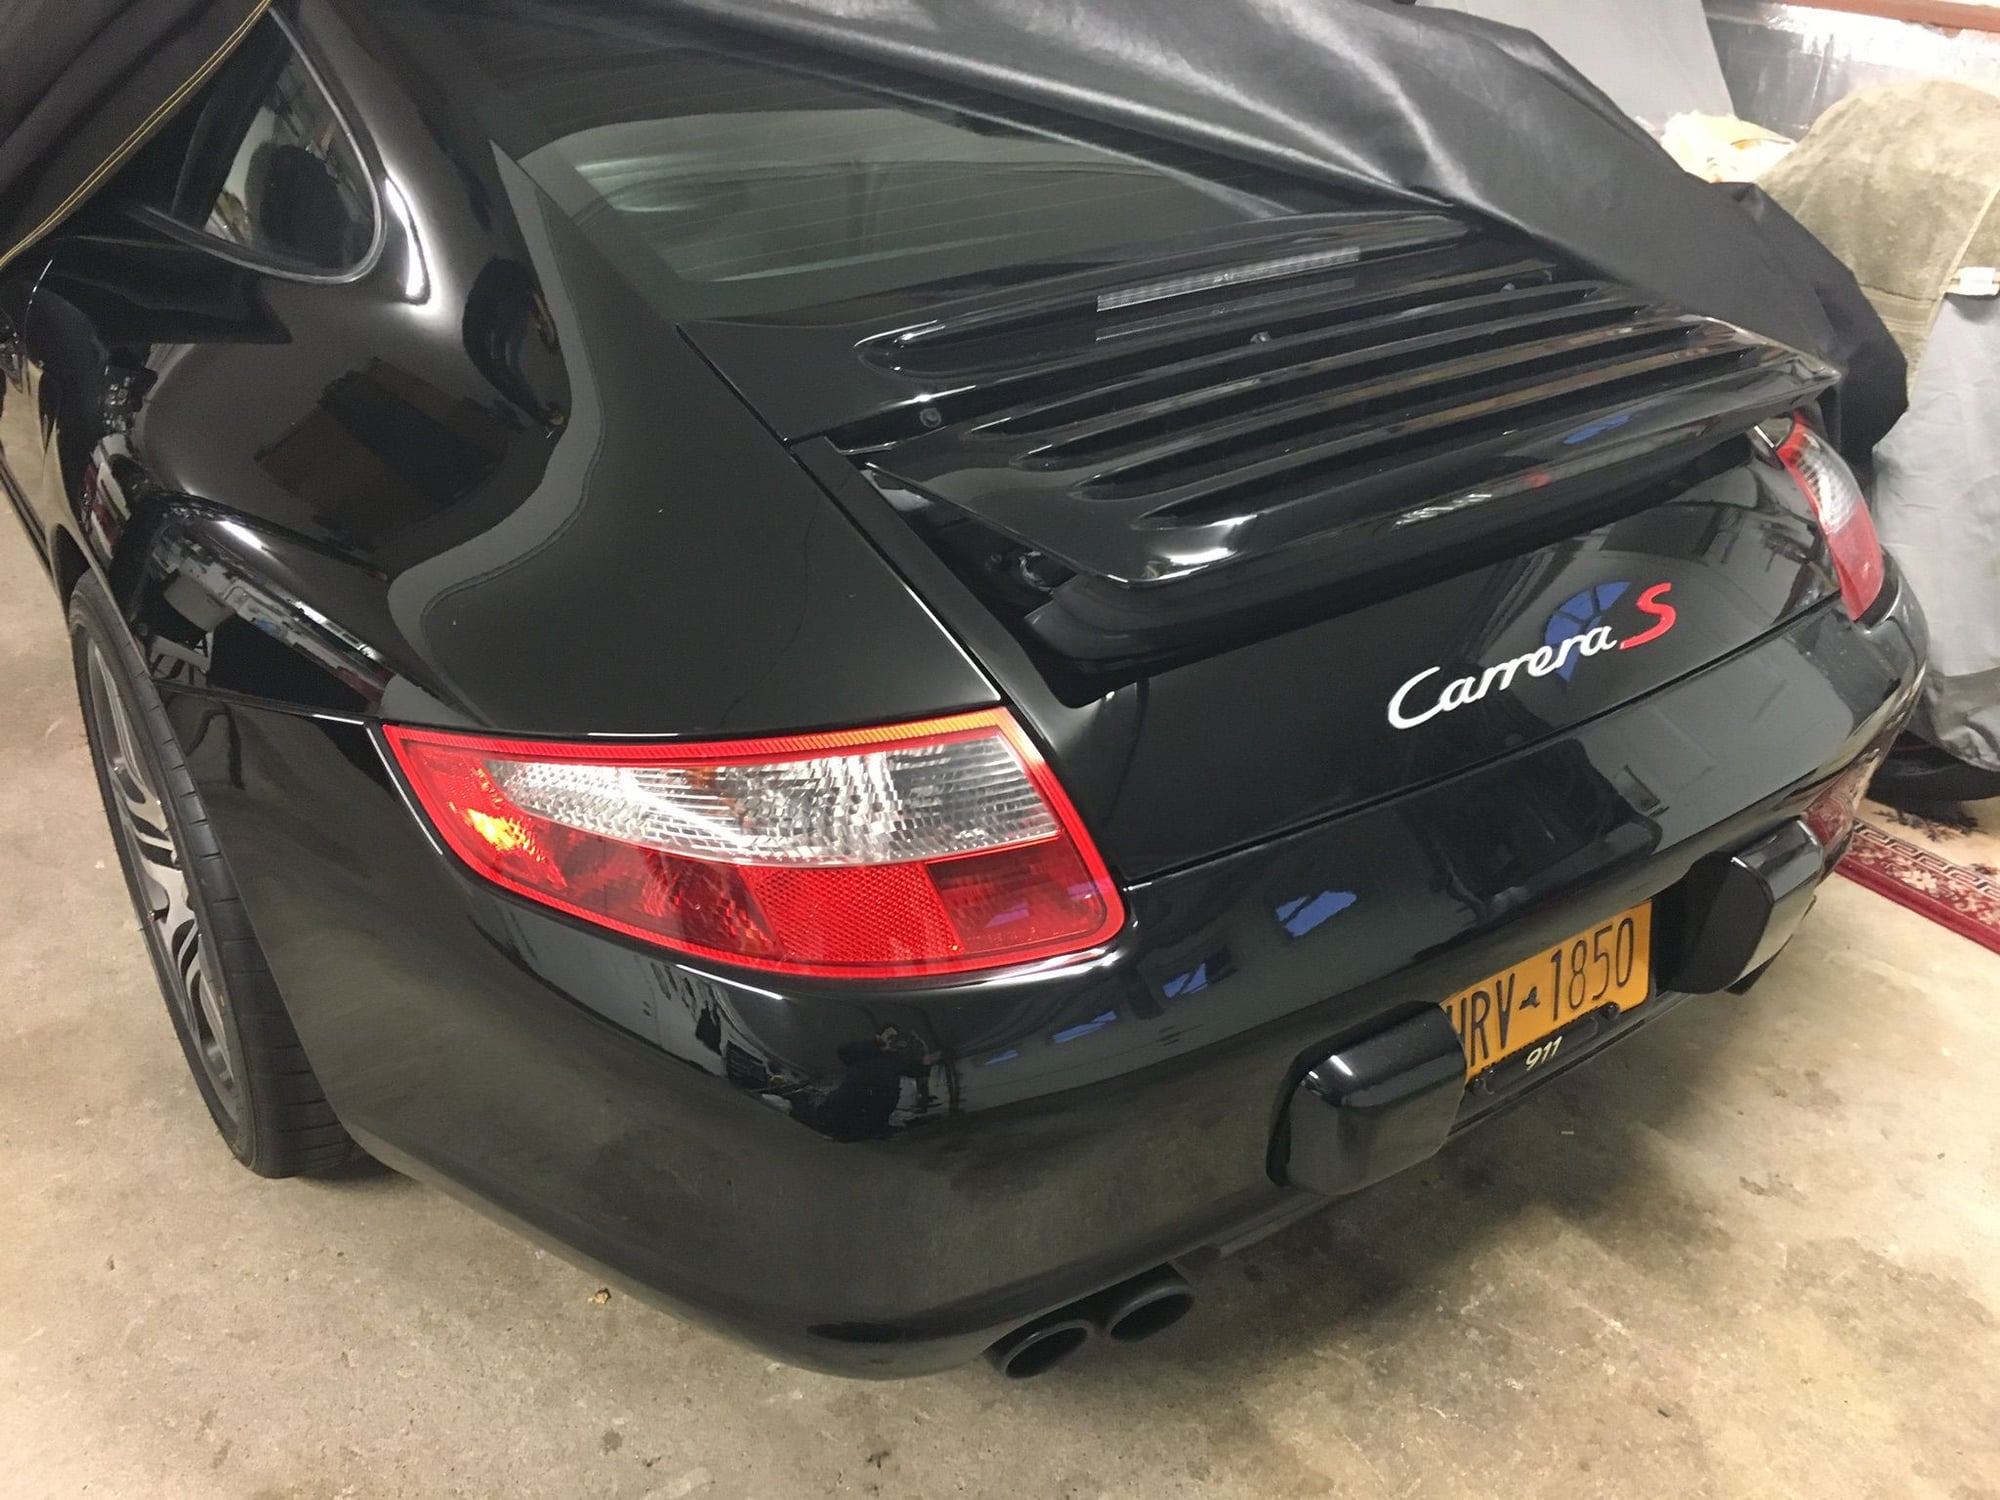 2005 Porsche 911 - 2005 Porsche 997 - Used - VIN 888888888888 - 82,000 Miles - 6 cyl - 2WD - Manual - Coupe - Black - Mahopac, NY 10541, United States